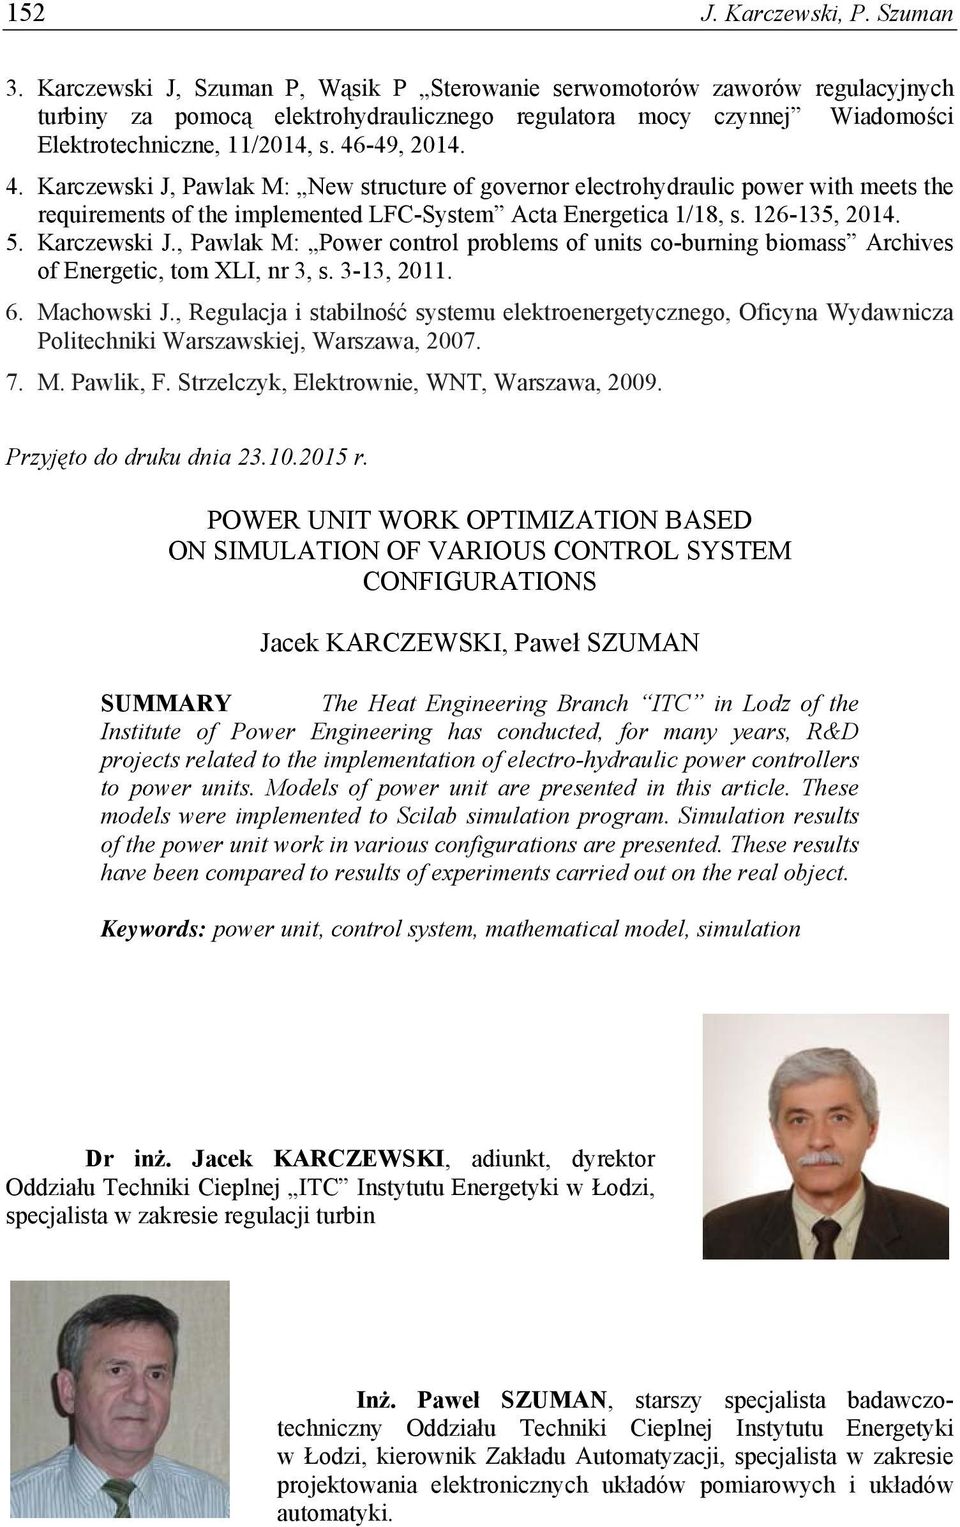 -49, 2014. 4. Karczewski J, Pawlak M: New structure of governor electrohydraulic power with meets the requirements of the implemented LFC-System Acta Energetica 1/18, s. 126-135, 2014. 5.